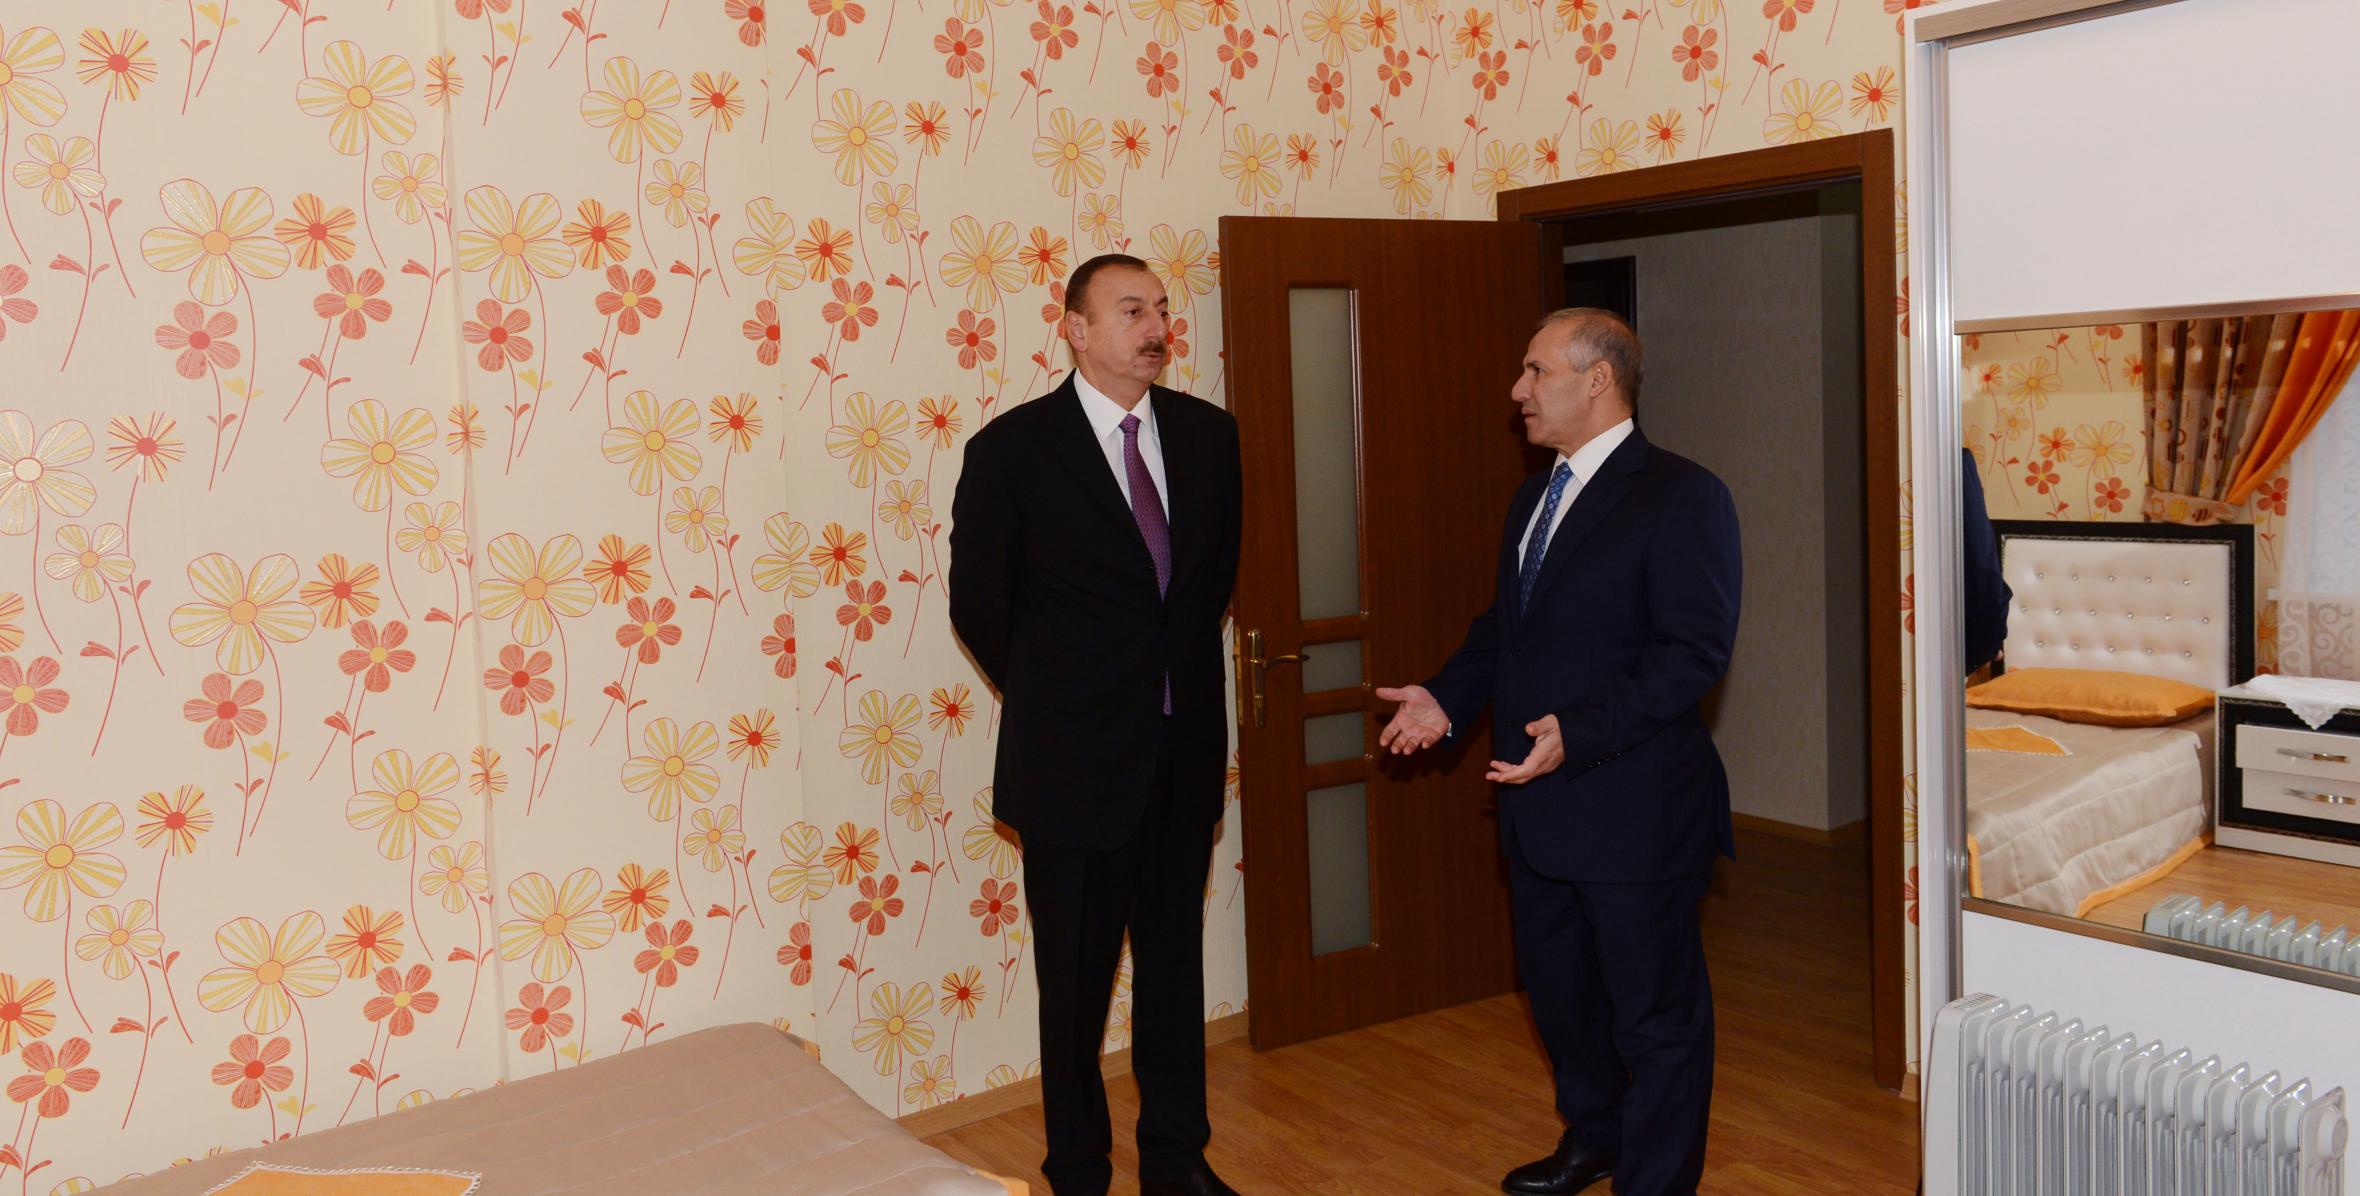 Ilham Aliyev attended the opening of a residential building for disabled veterans of the Karabakh war and martyr families in Sumgayit